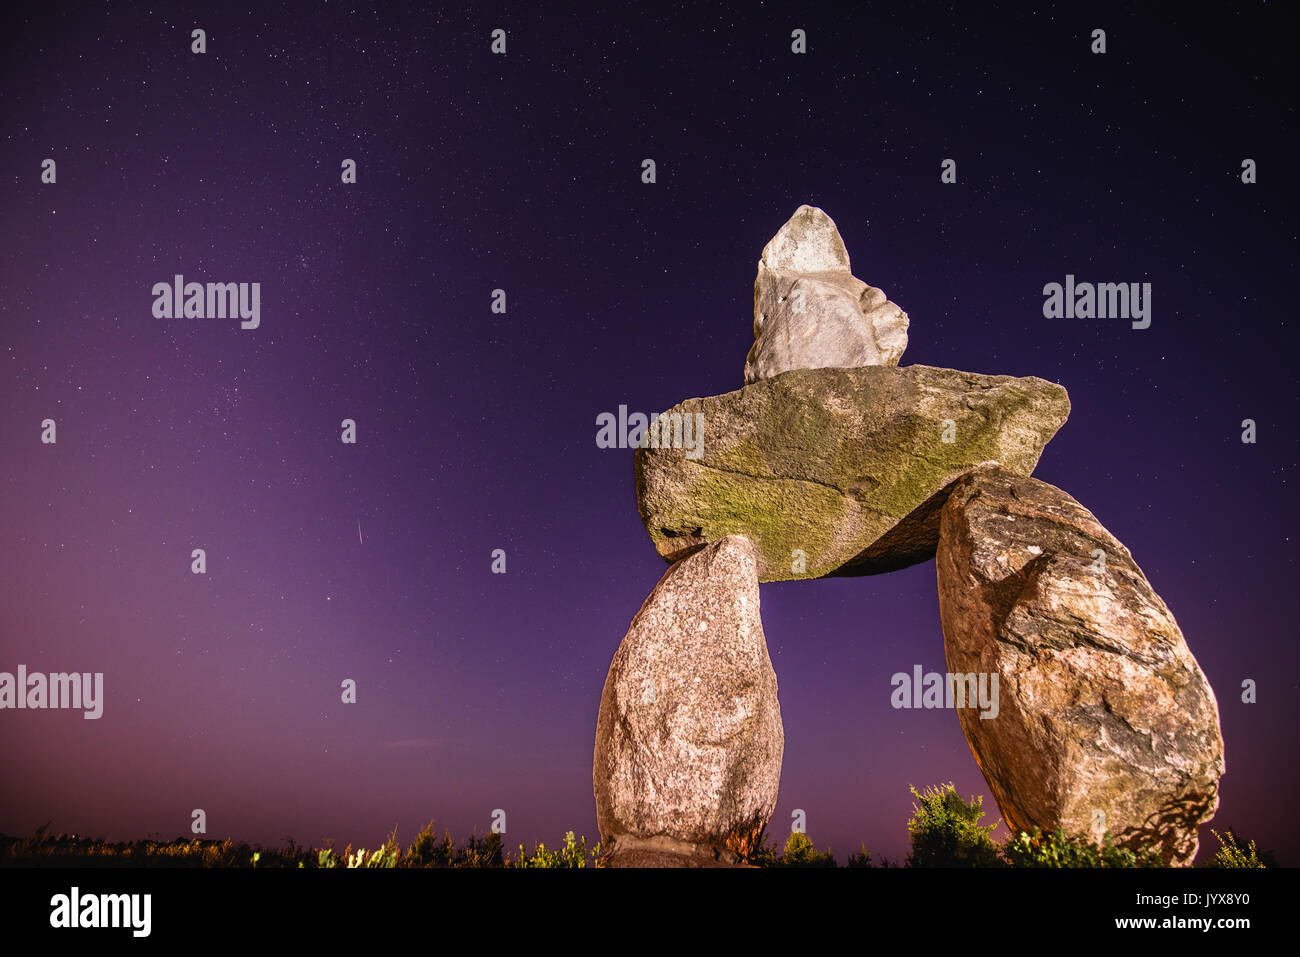 Abandoned stones under night sky with falling Perseid Stock Photo